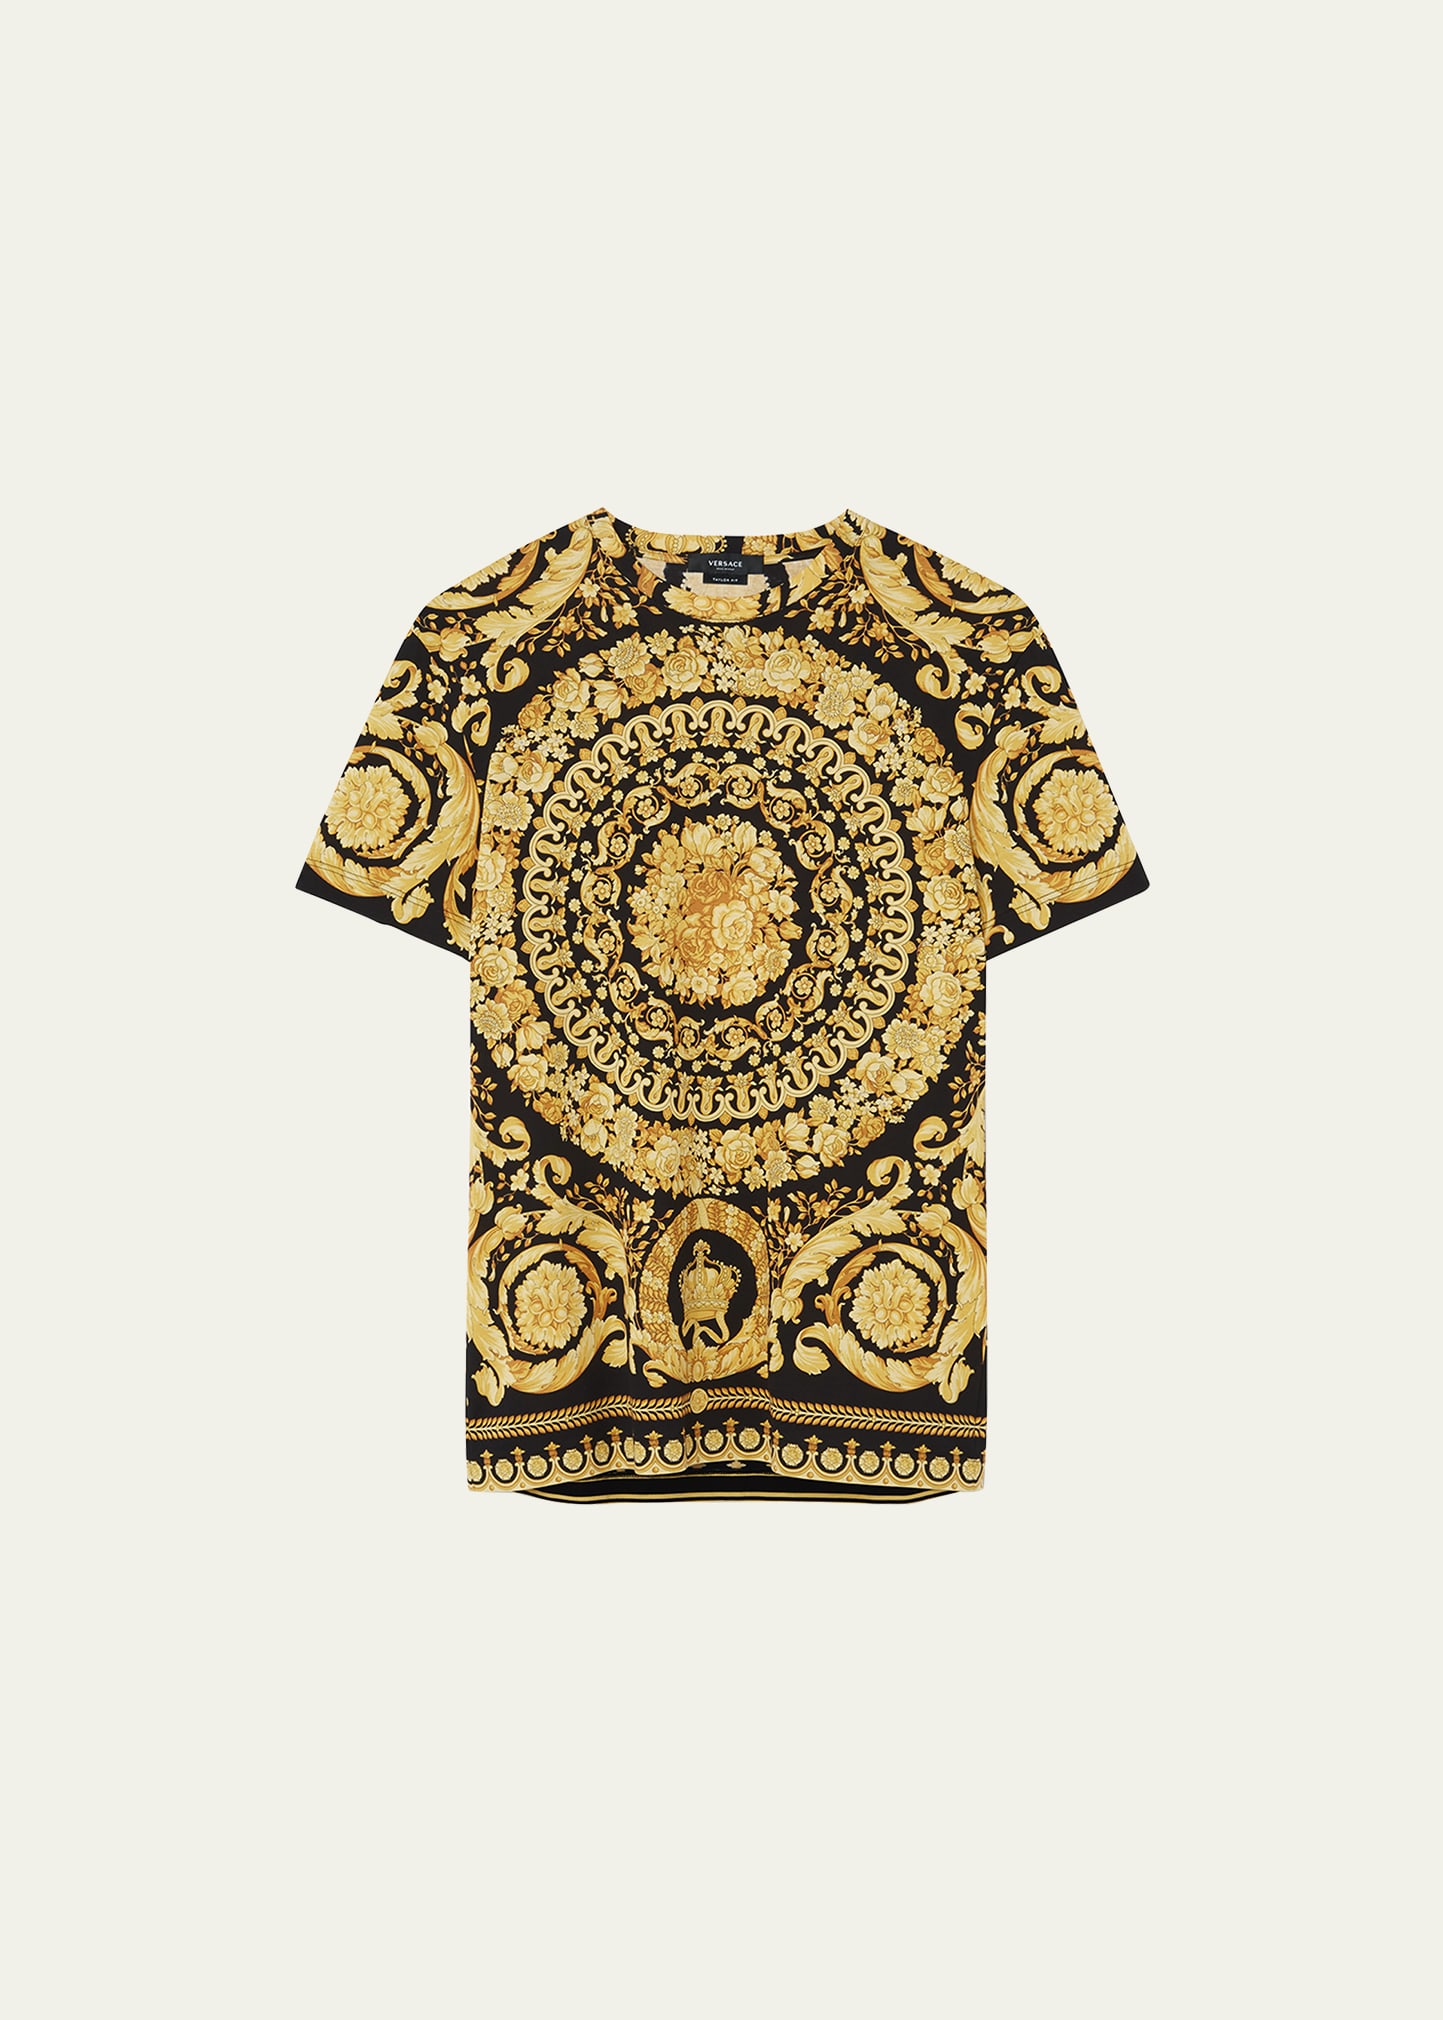 Versace T-shirt - White w. Logo » New Styles Every Day